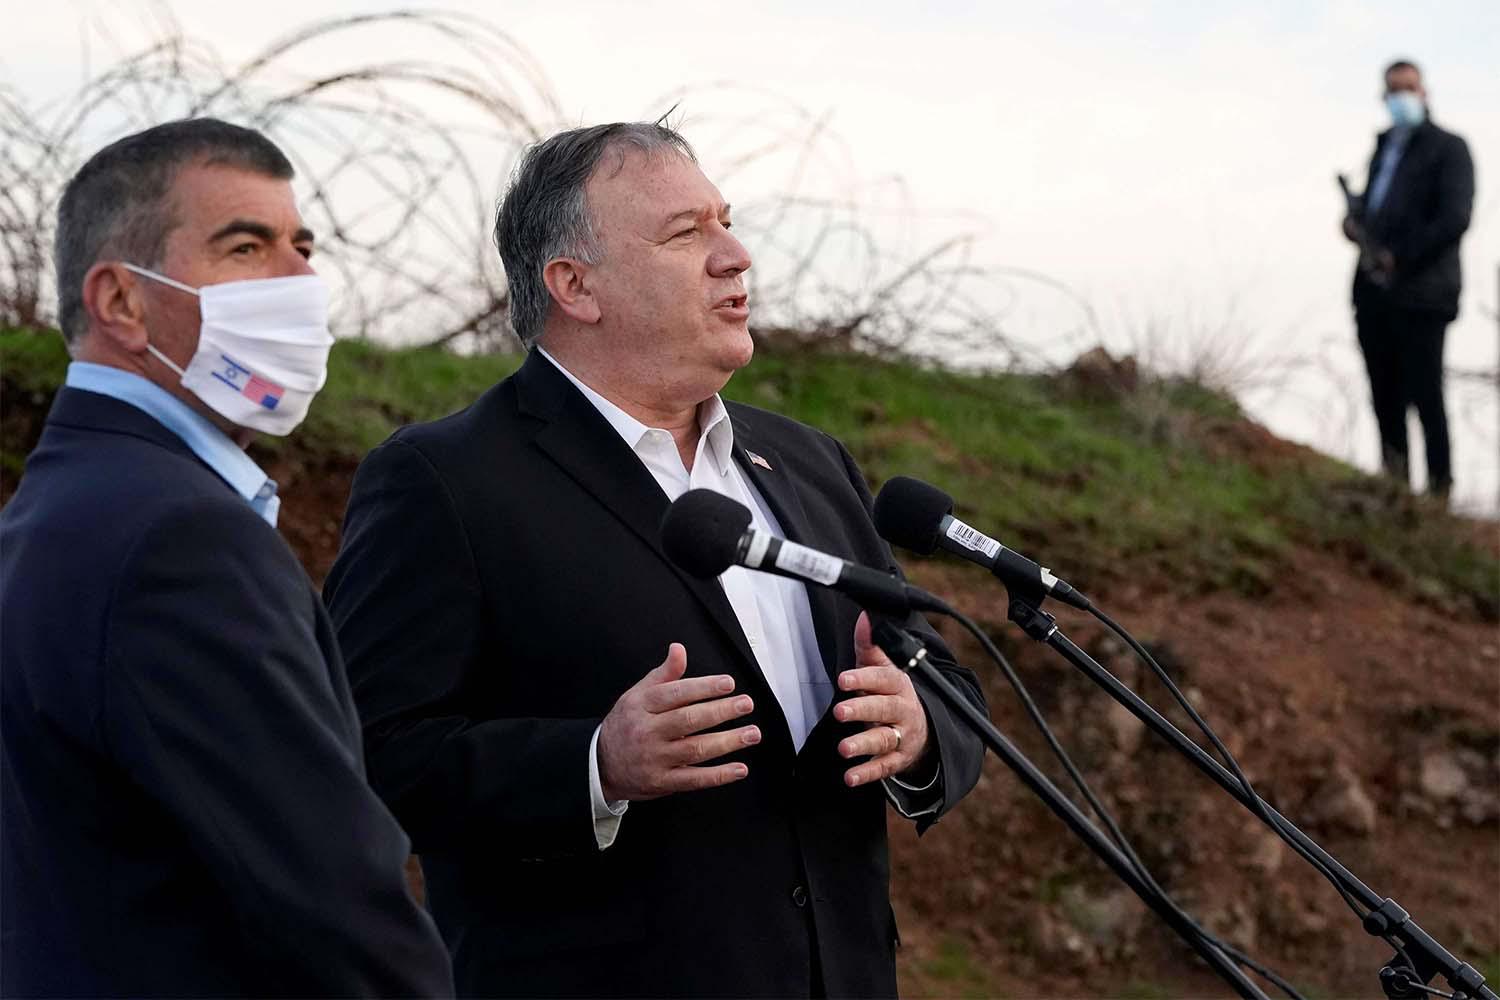 US Secretary of State Mike Pompeo speaks alongside Israeli Foreign Minister Gabi Ashkenazi (L) following a security briefing on Mount Bental